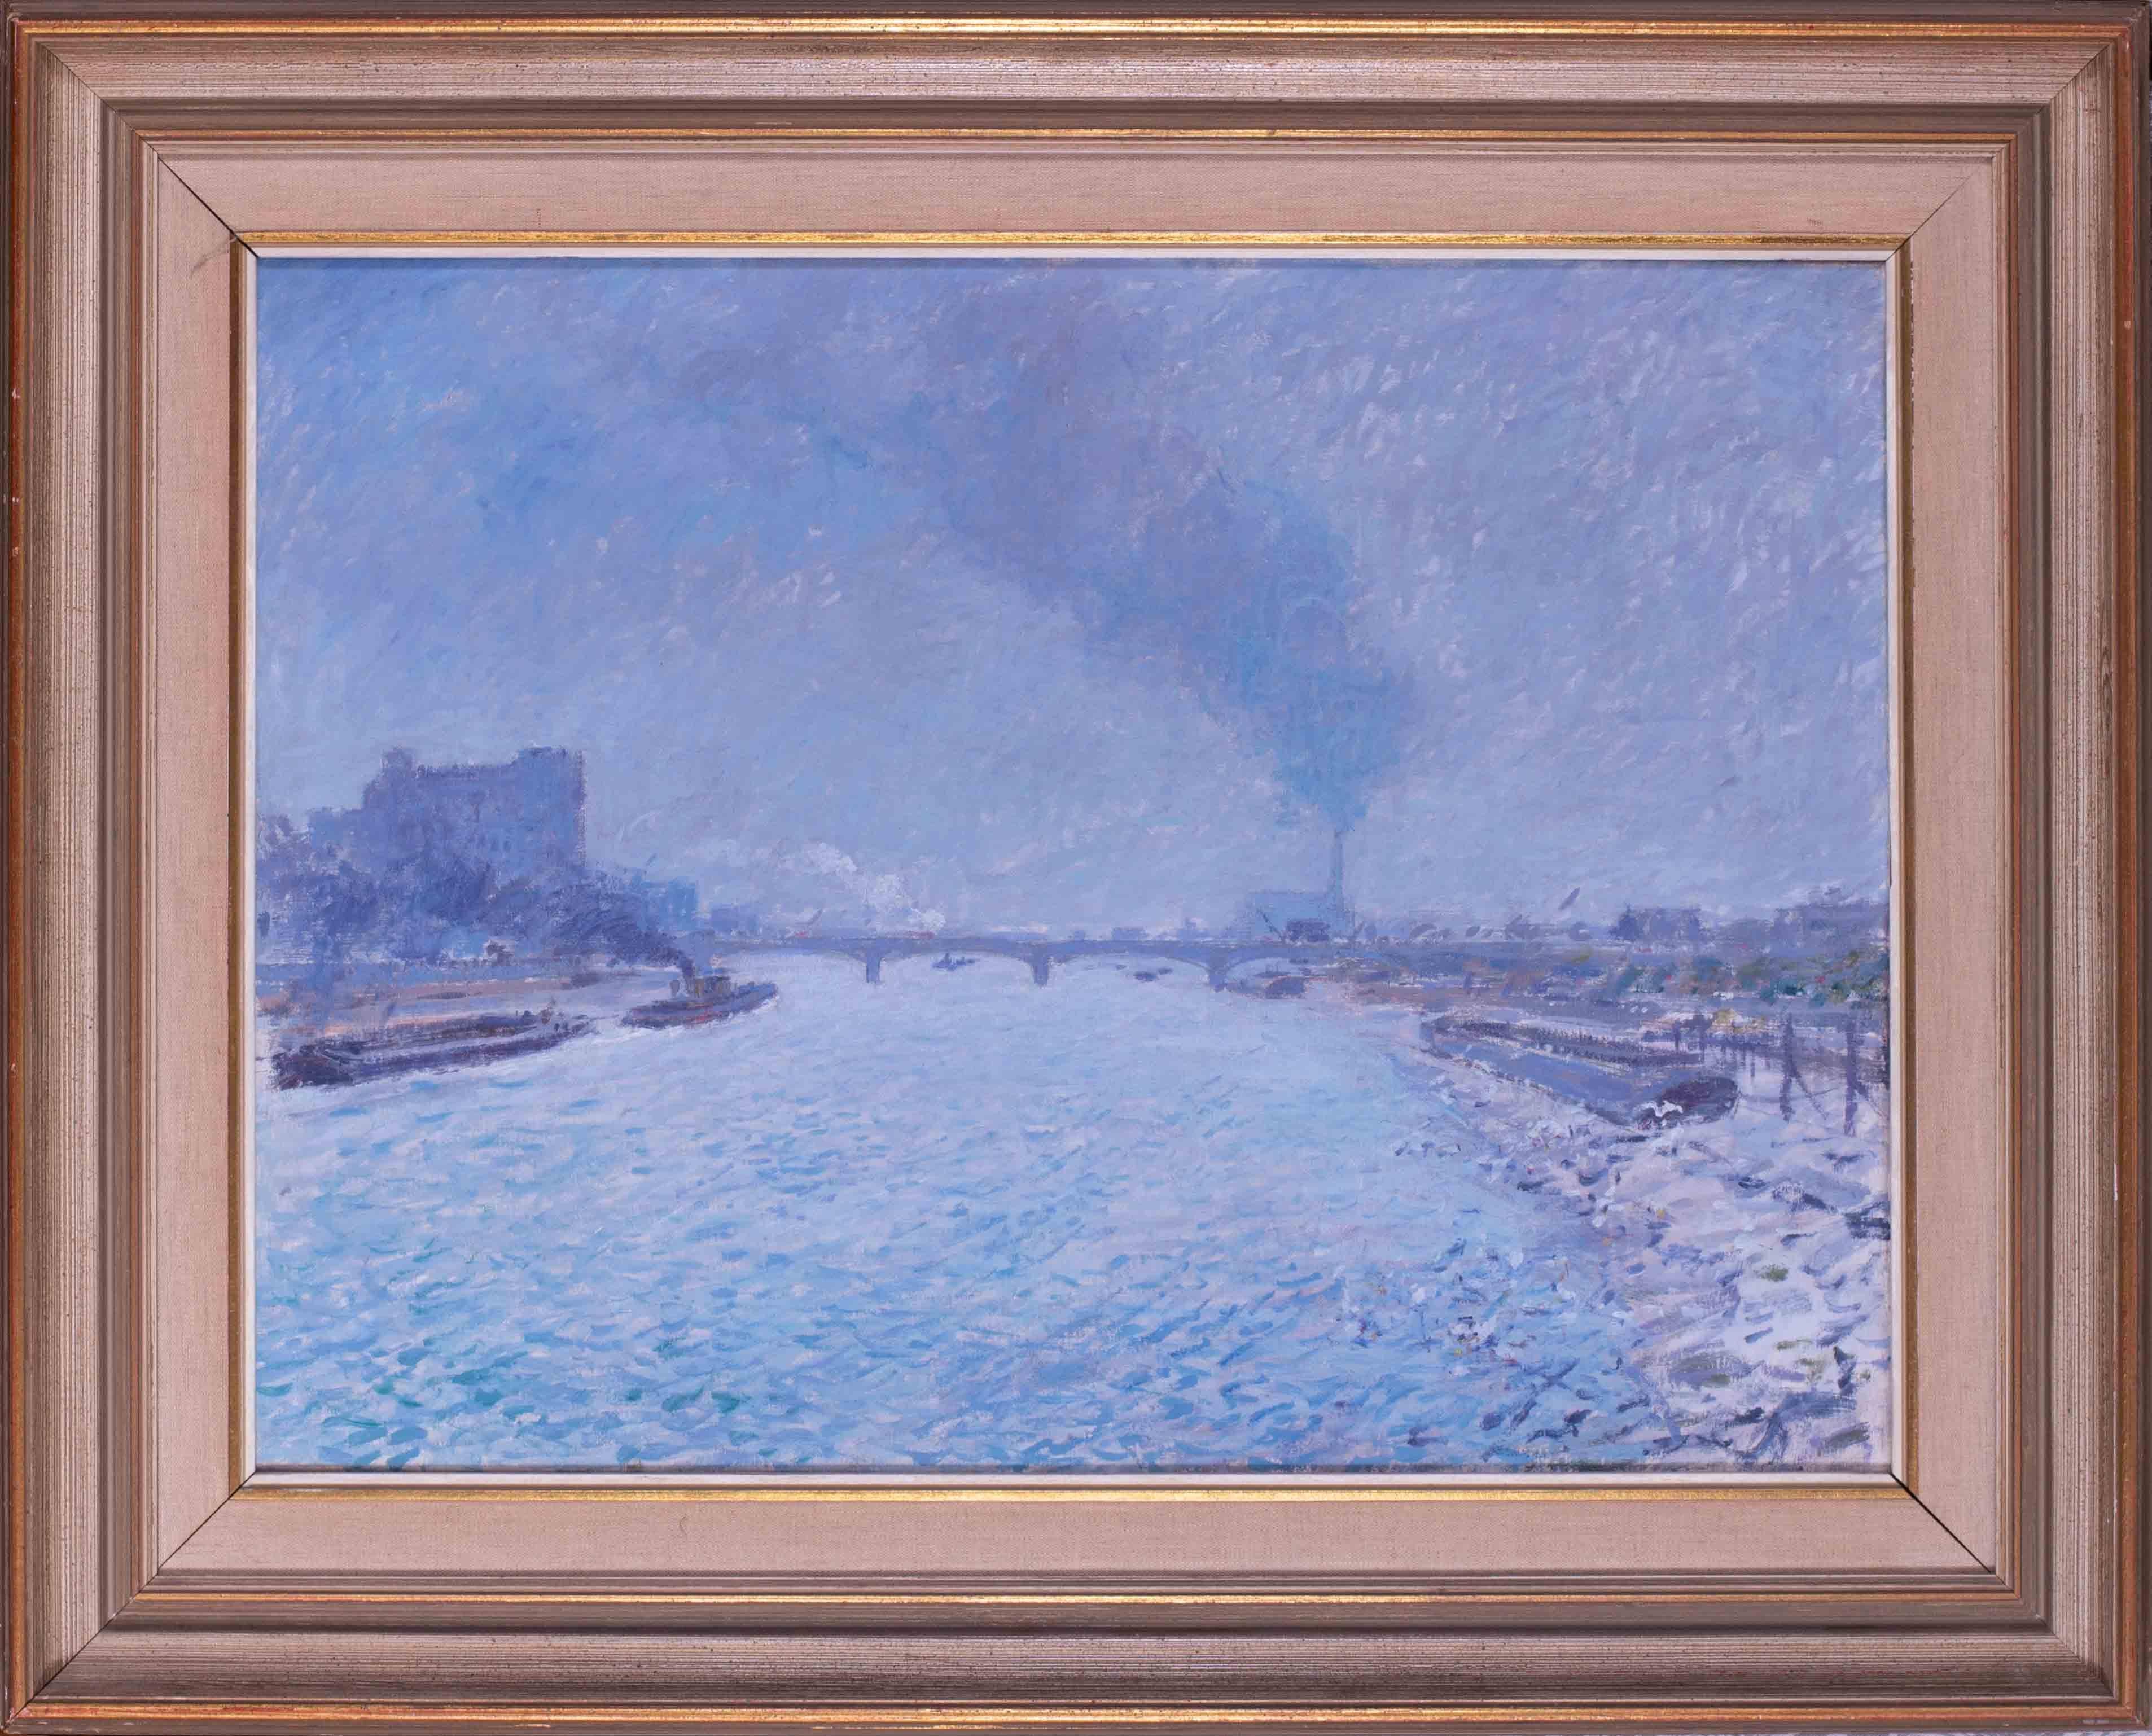 Derick Mynott  Landscape Painting - 20th Century British Impressionist painting of the Thames, London, in blue tones